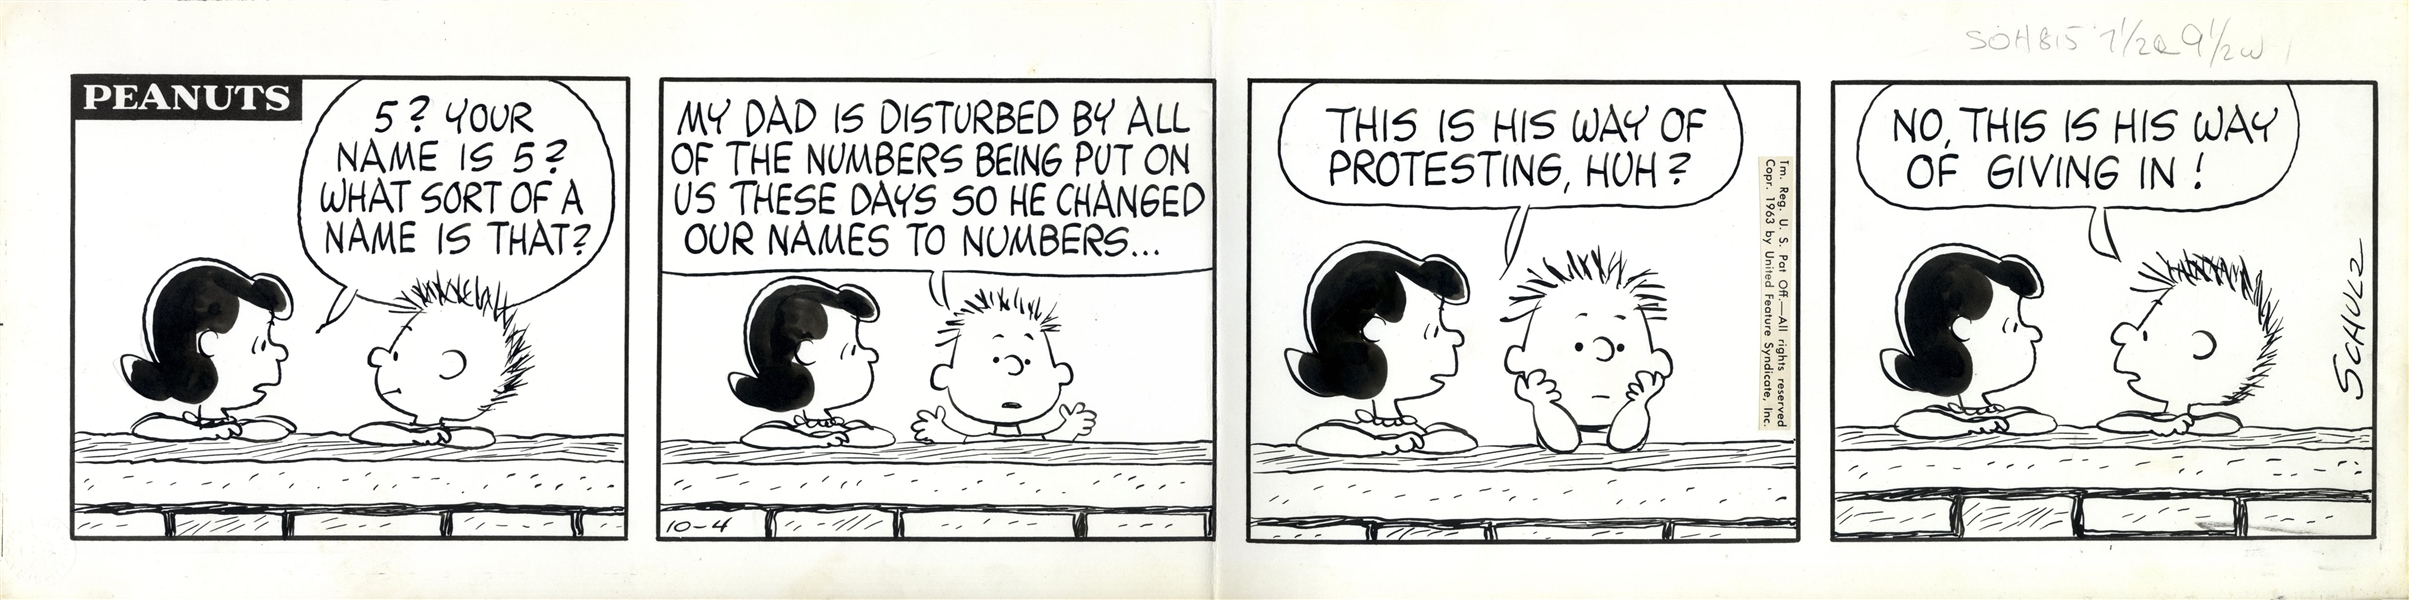 Charles Schulz Hand-Drawn Comic Strip From October 1963 -- The First Appearance of Character ''555 95472'', Schulz's Tongue-in-Cheek Protestation of Zip Codes & 7 Digit Phone #'s